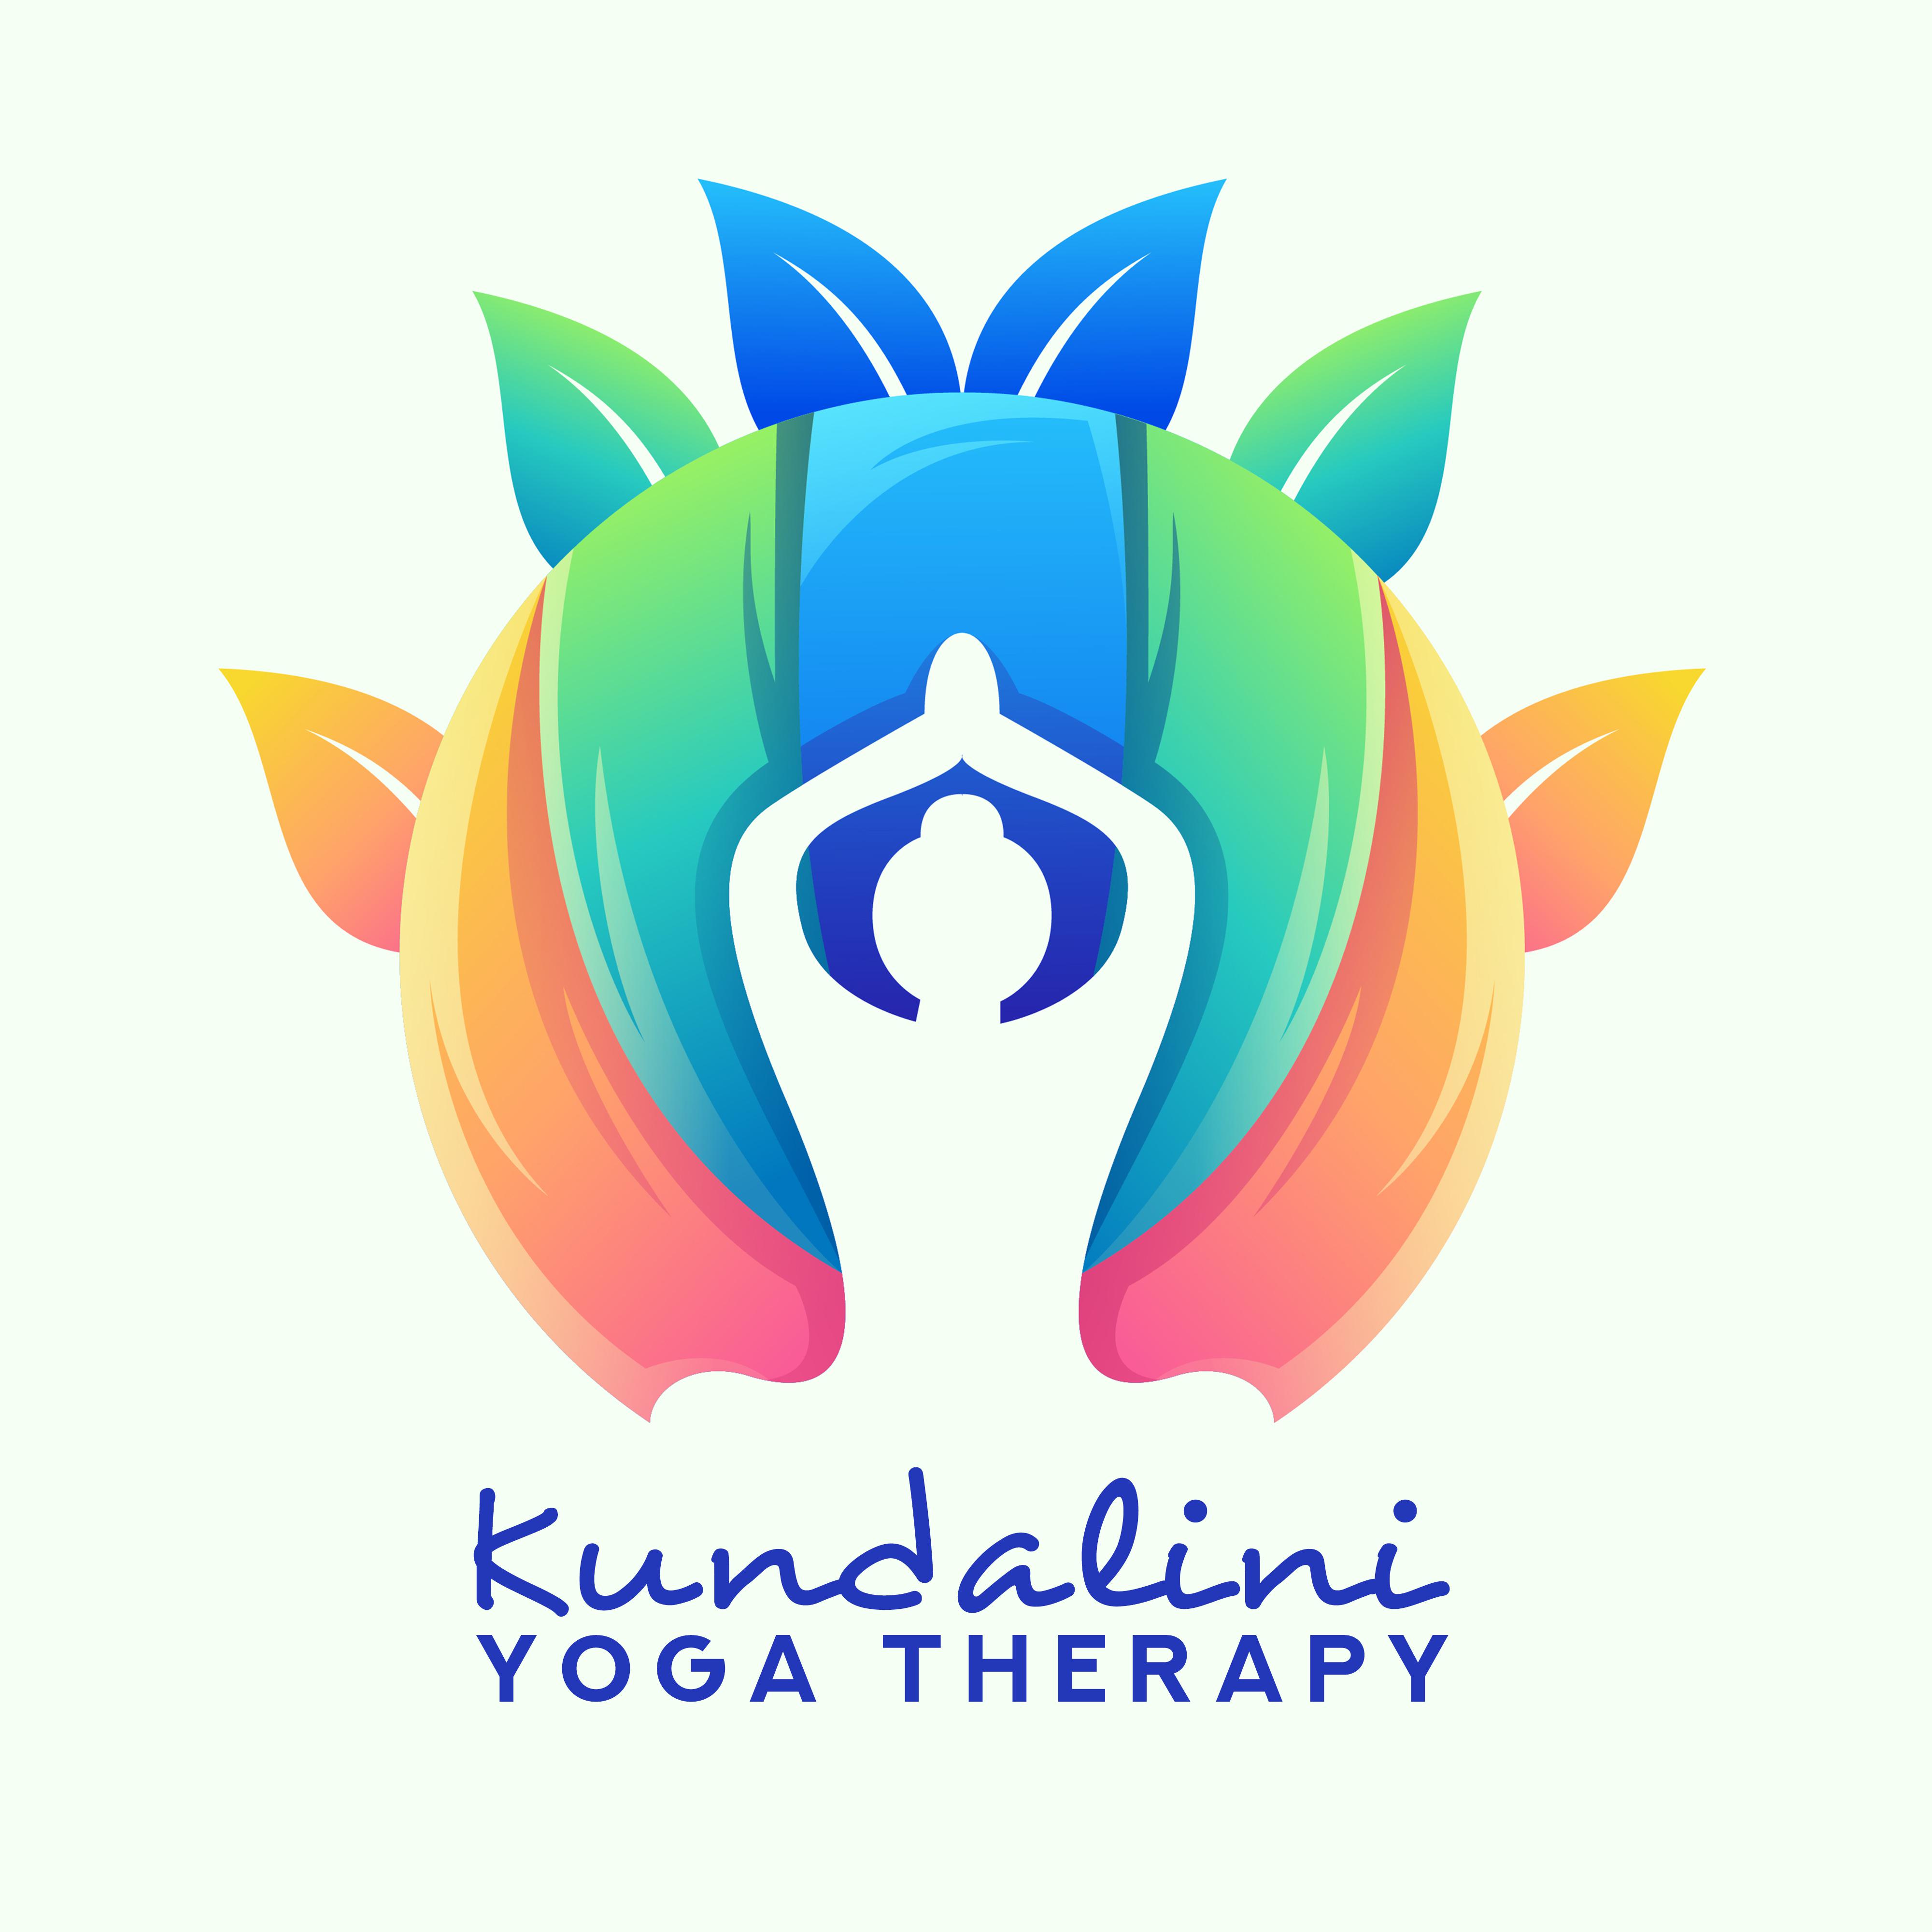 Kundalini Yoga Therapy: 2019 Ambient Deep Music for Total Meditation & Relaxation Experience, Zen Sounds, Calming Mantra